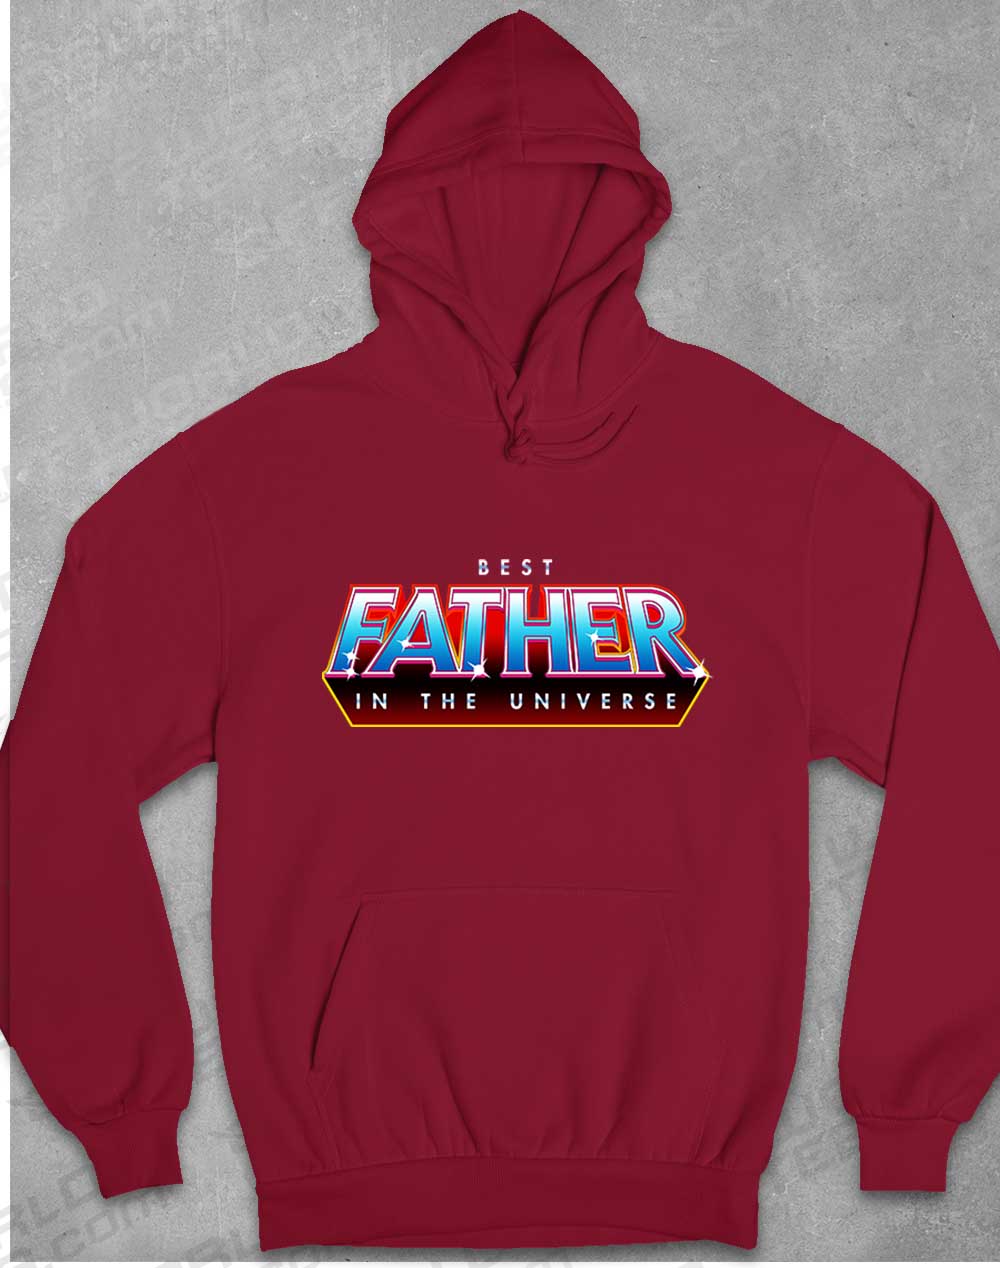 Burgundy - Best Father in the Universe Hoodie